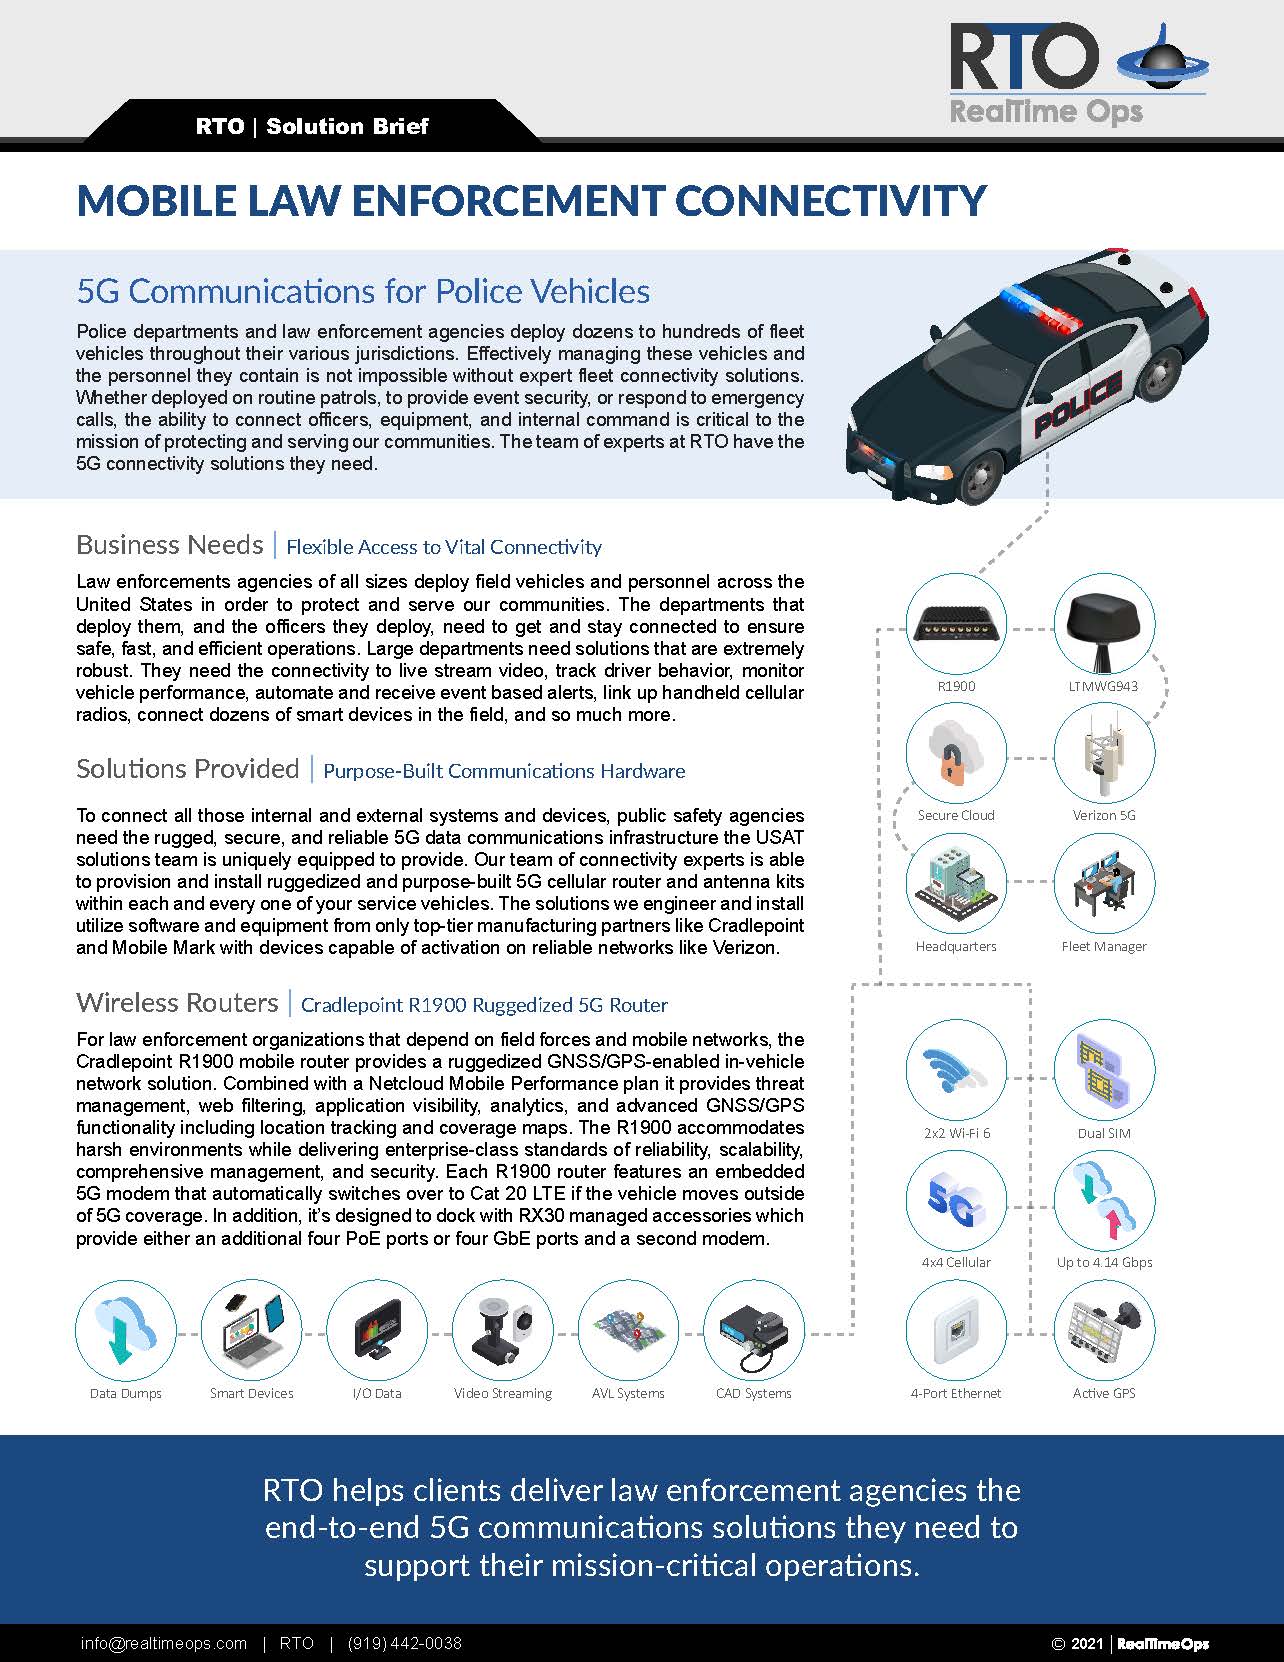 5G Police Car Connectivity Solutions